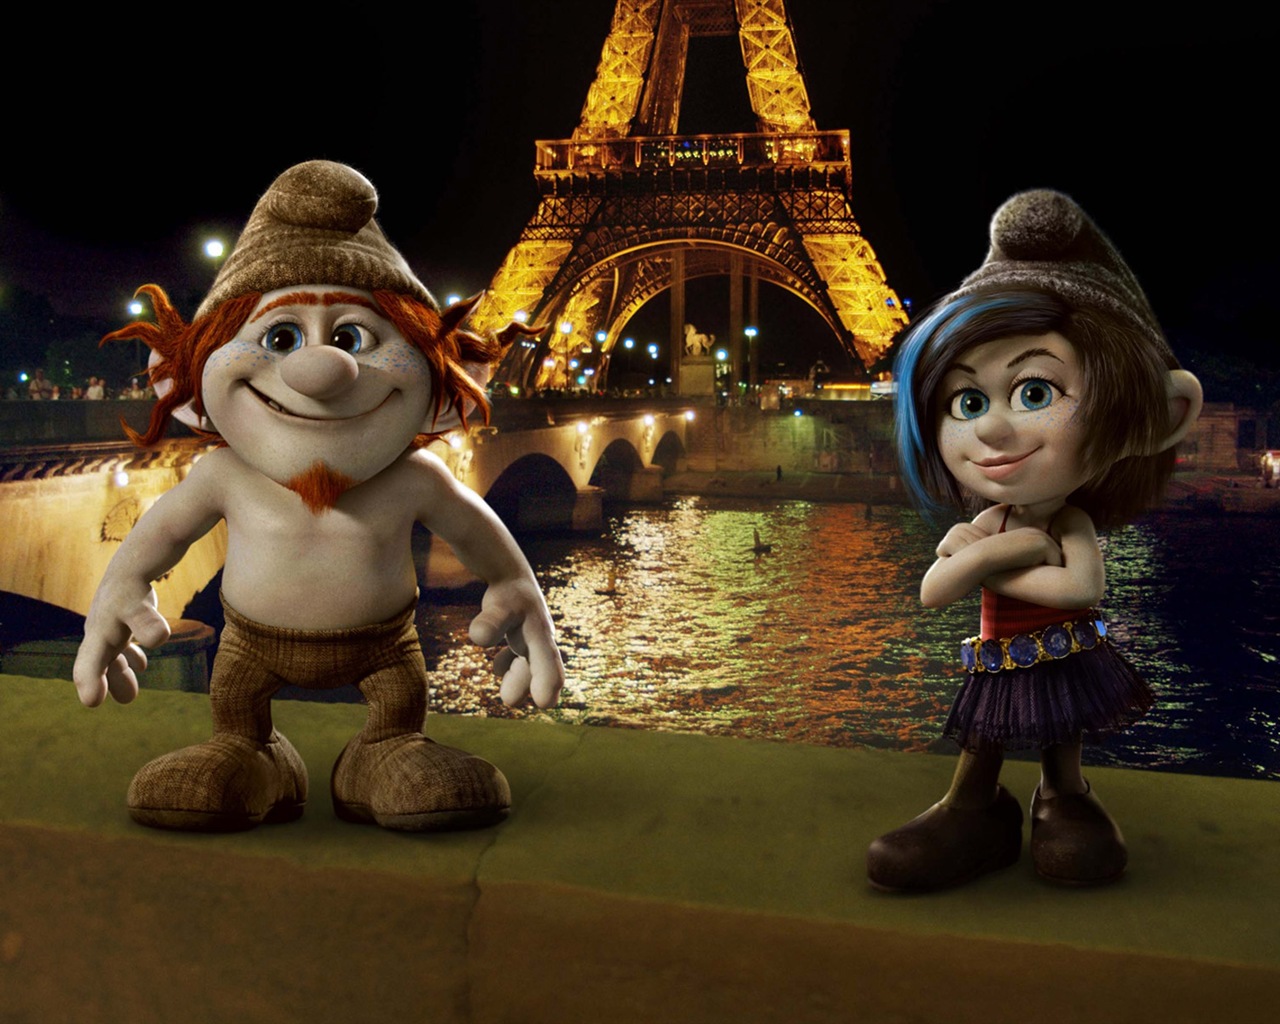 The Smurfs 2 HD movie wallpapers #6 - 1280x1024